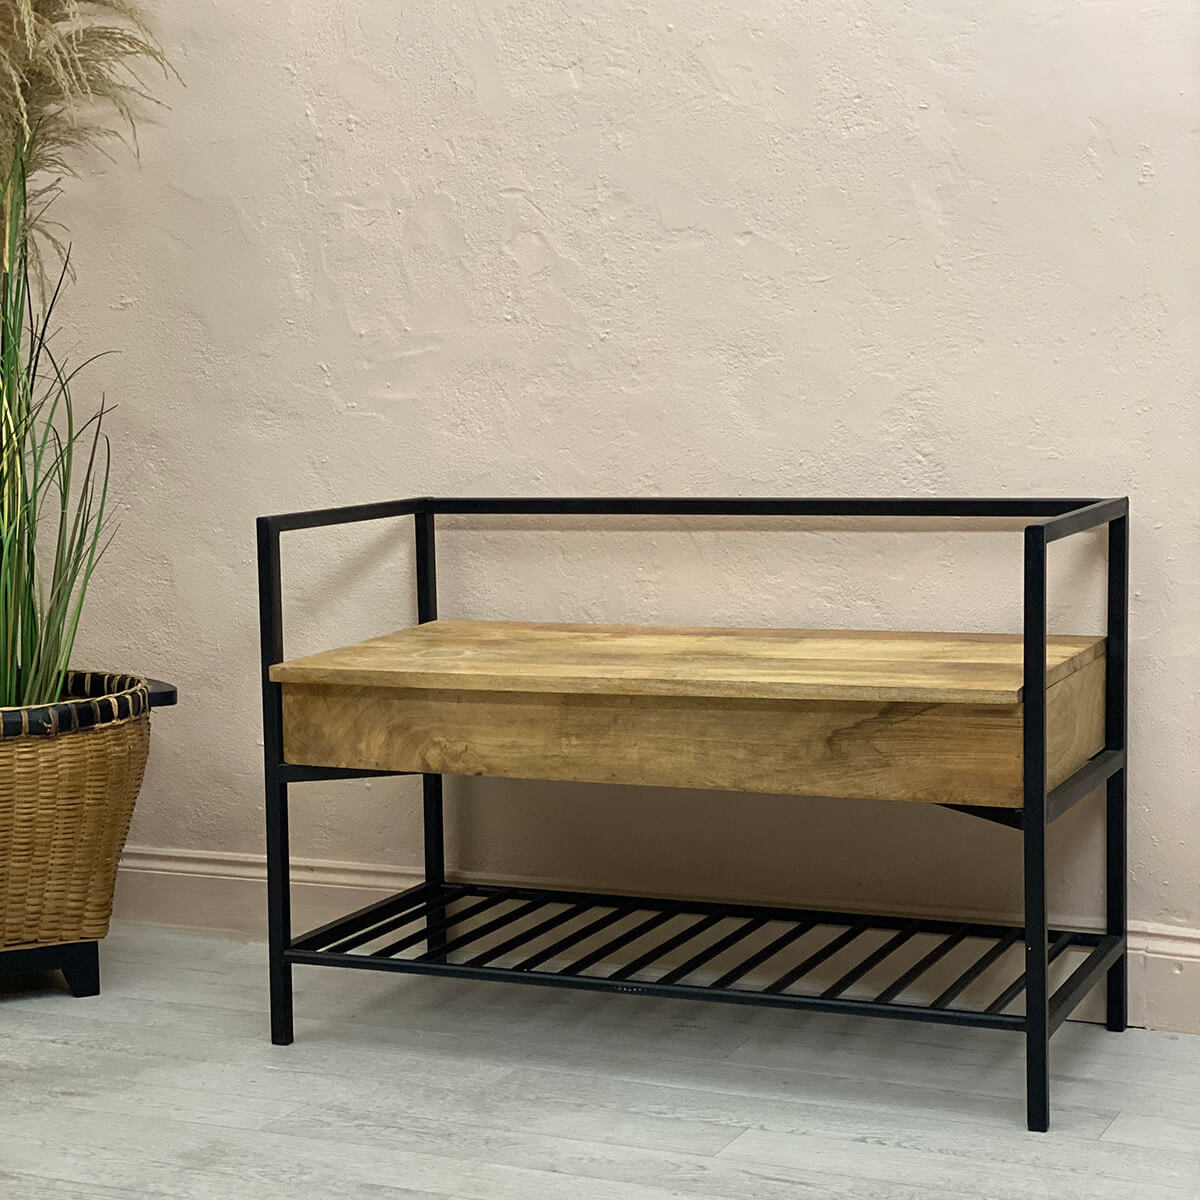 Cohen Industrial Storage Bench - Black Metal & Wood - Small - Mrs Robinson